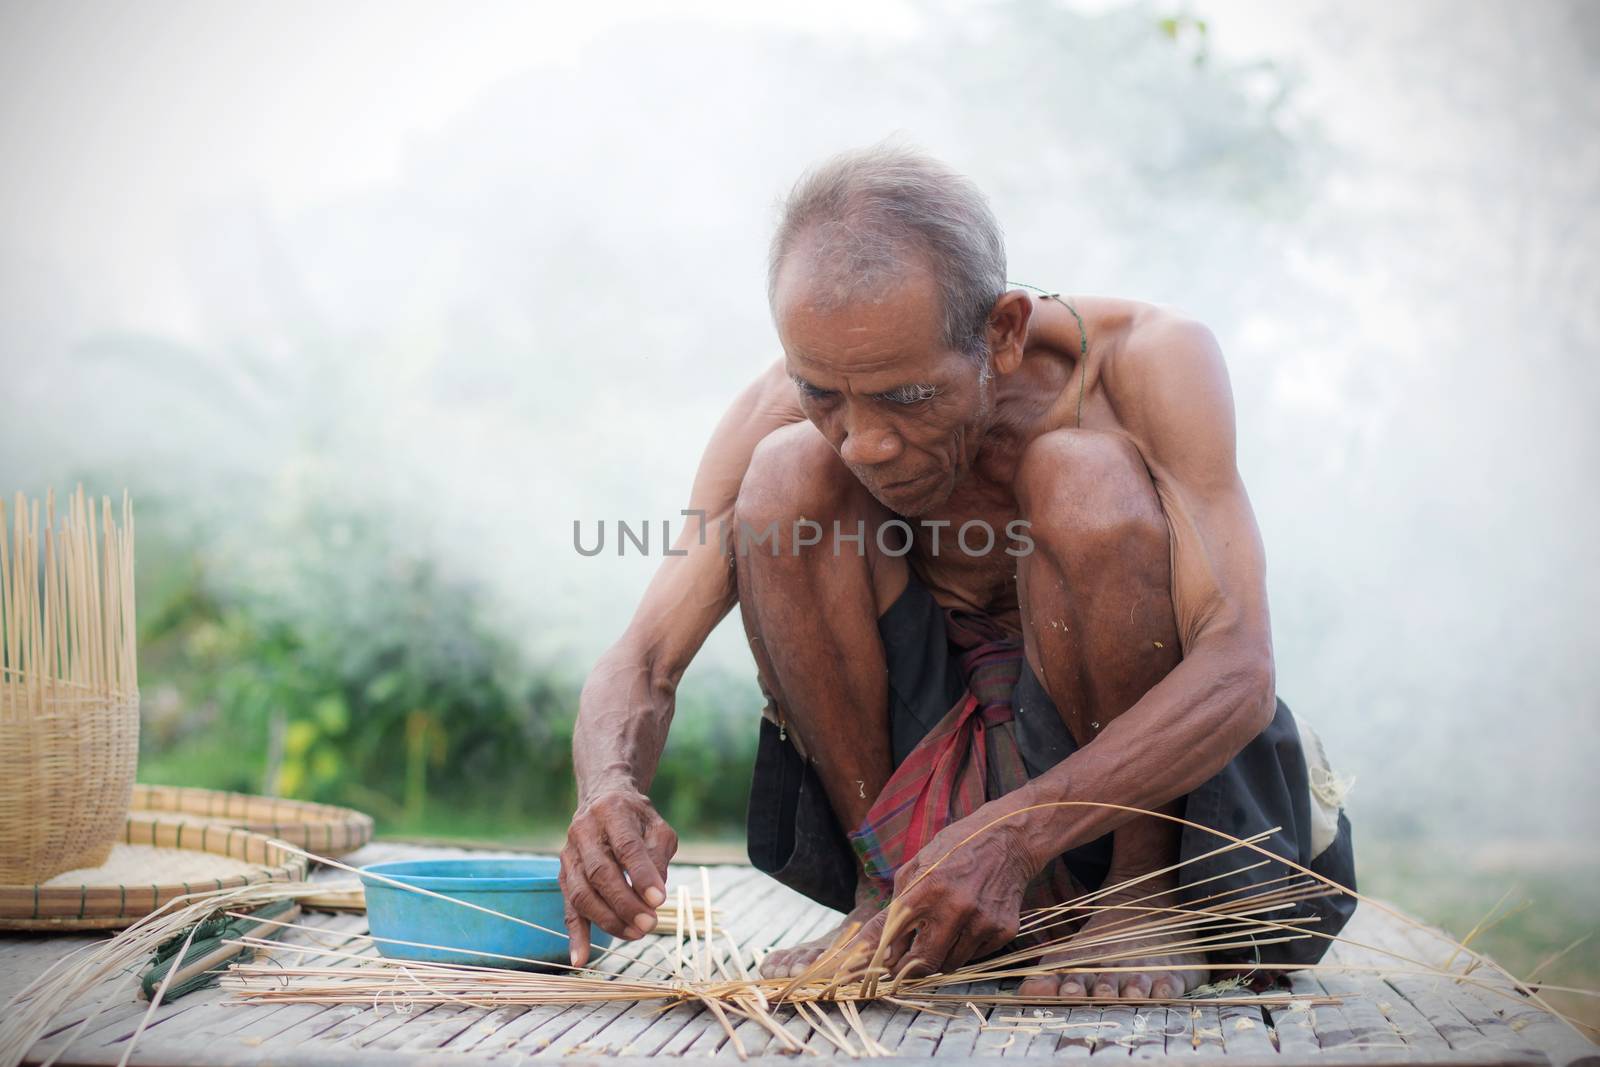 Older people with basketry in the countryside.